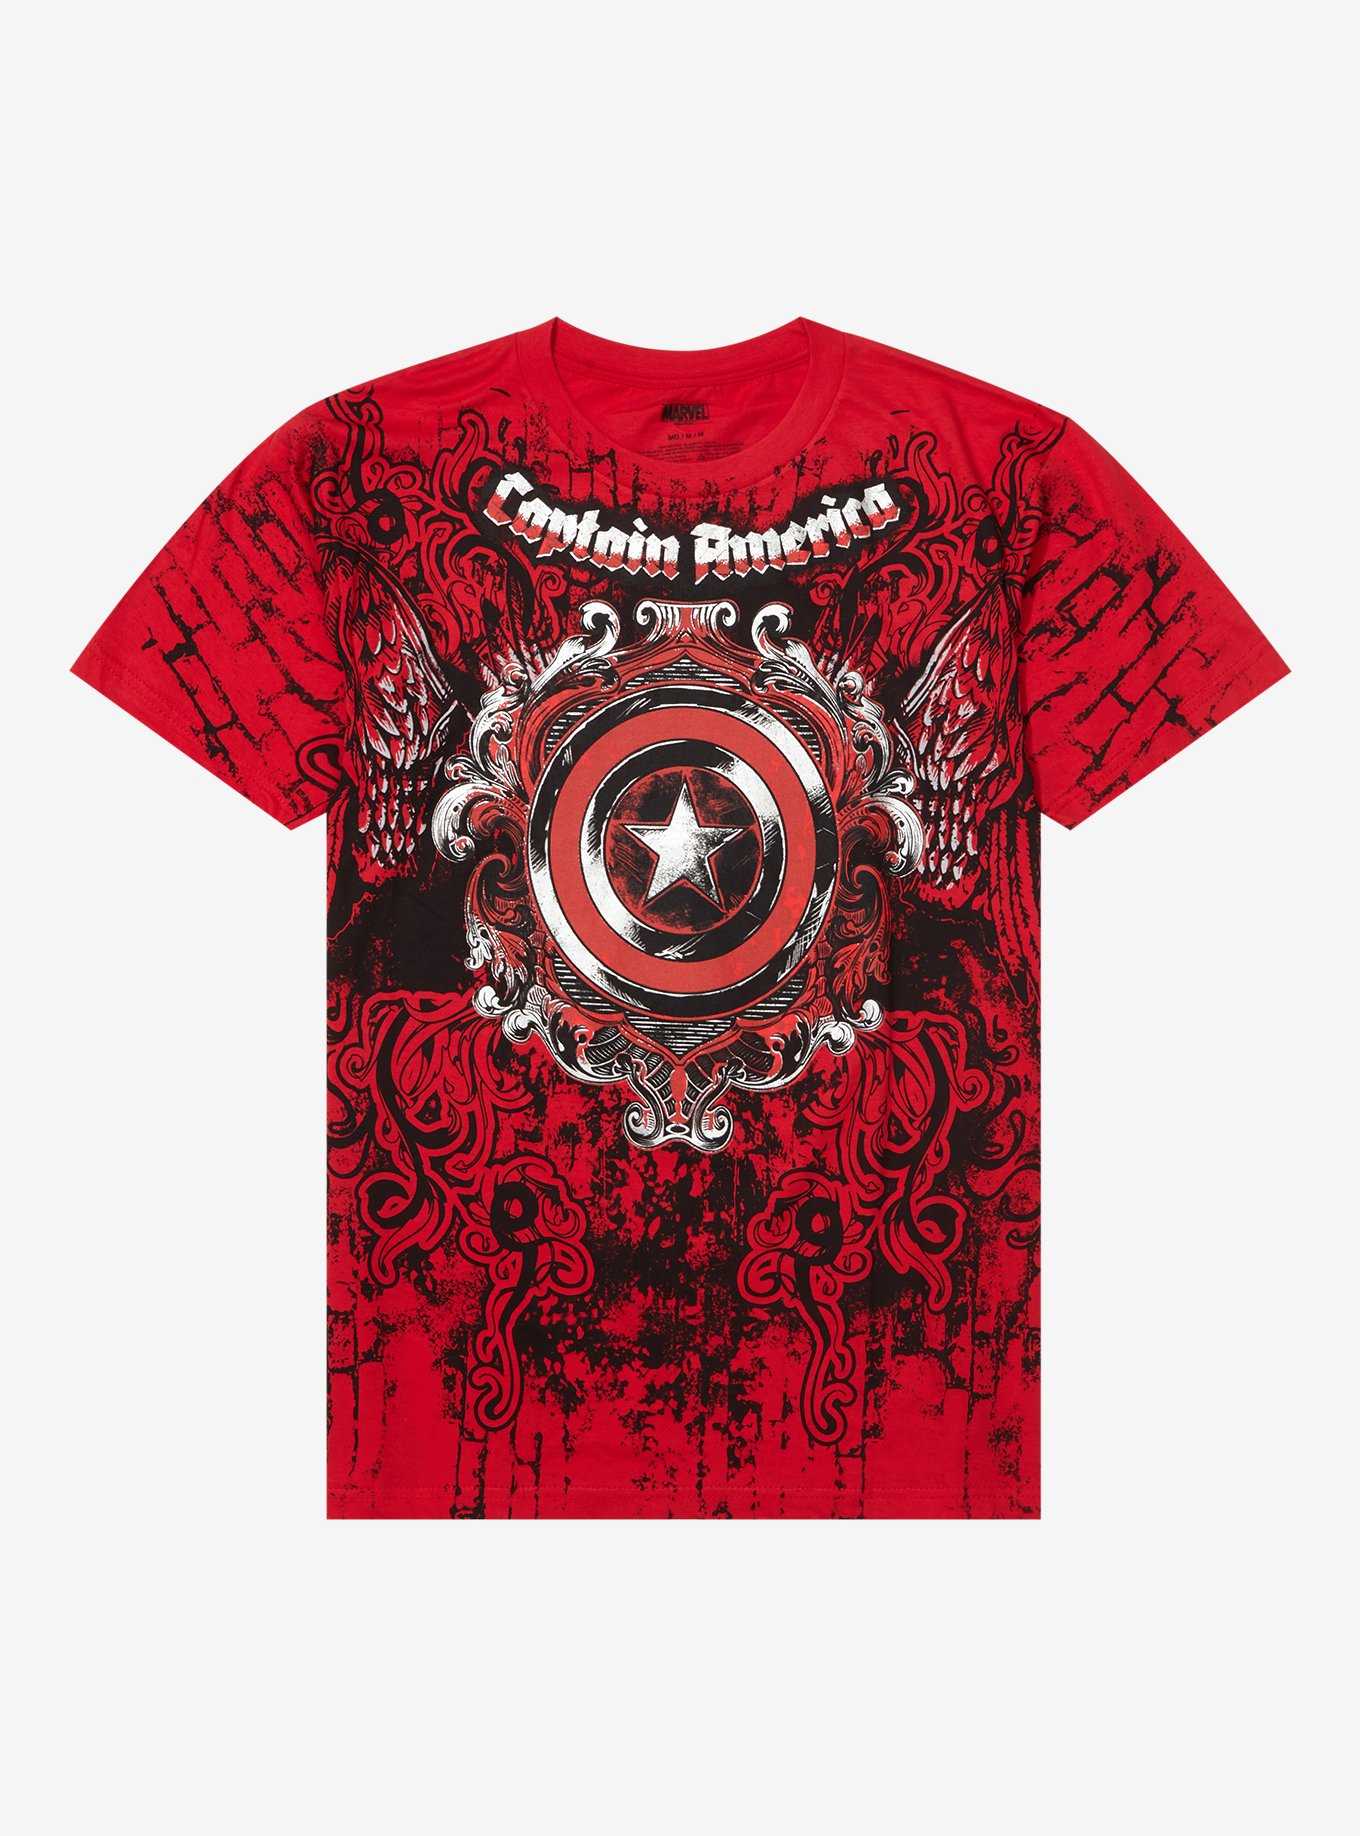 OFFICIAL Captain | Clothing & America Hot Shirts, Topic Merchandise